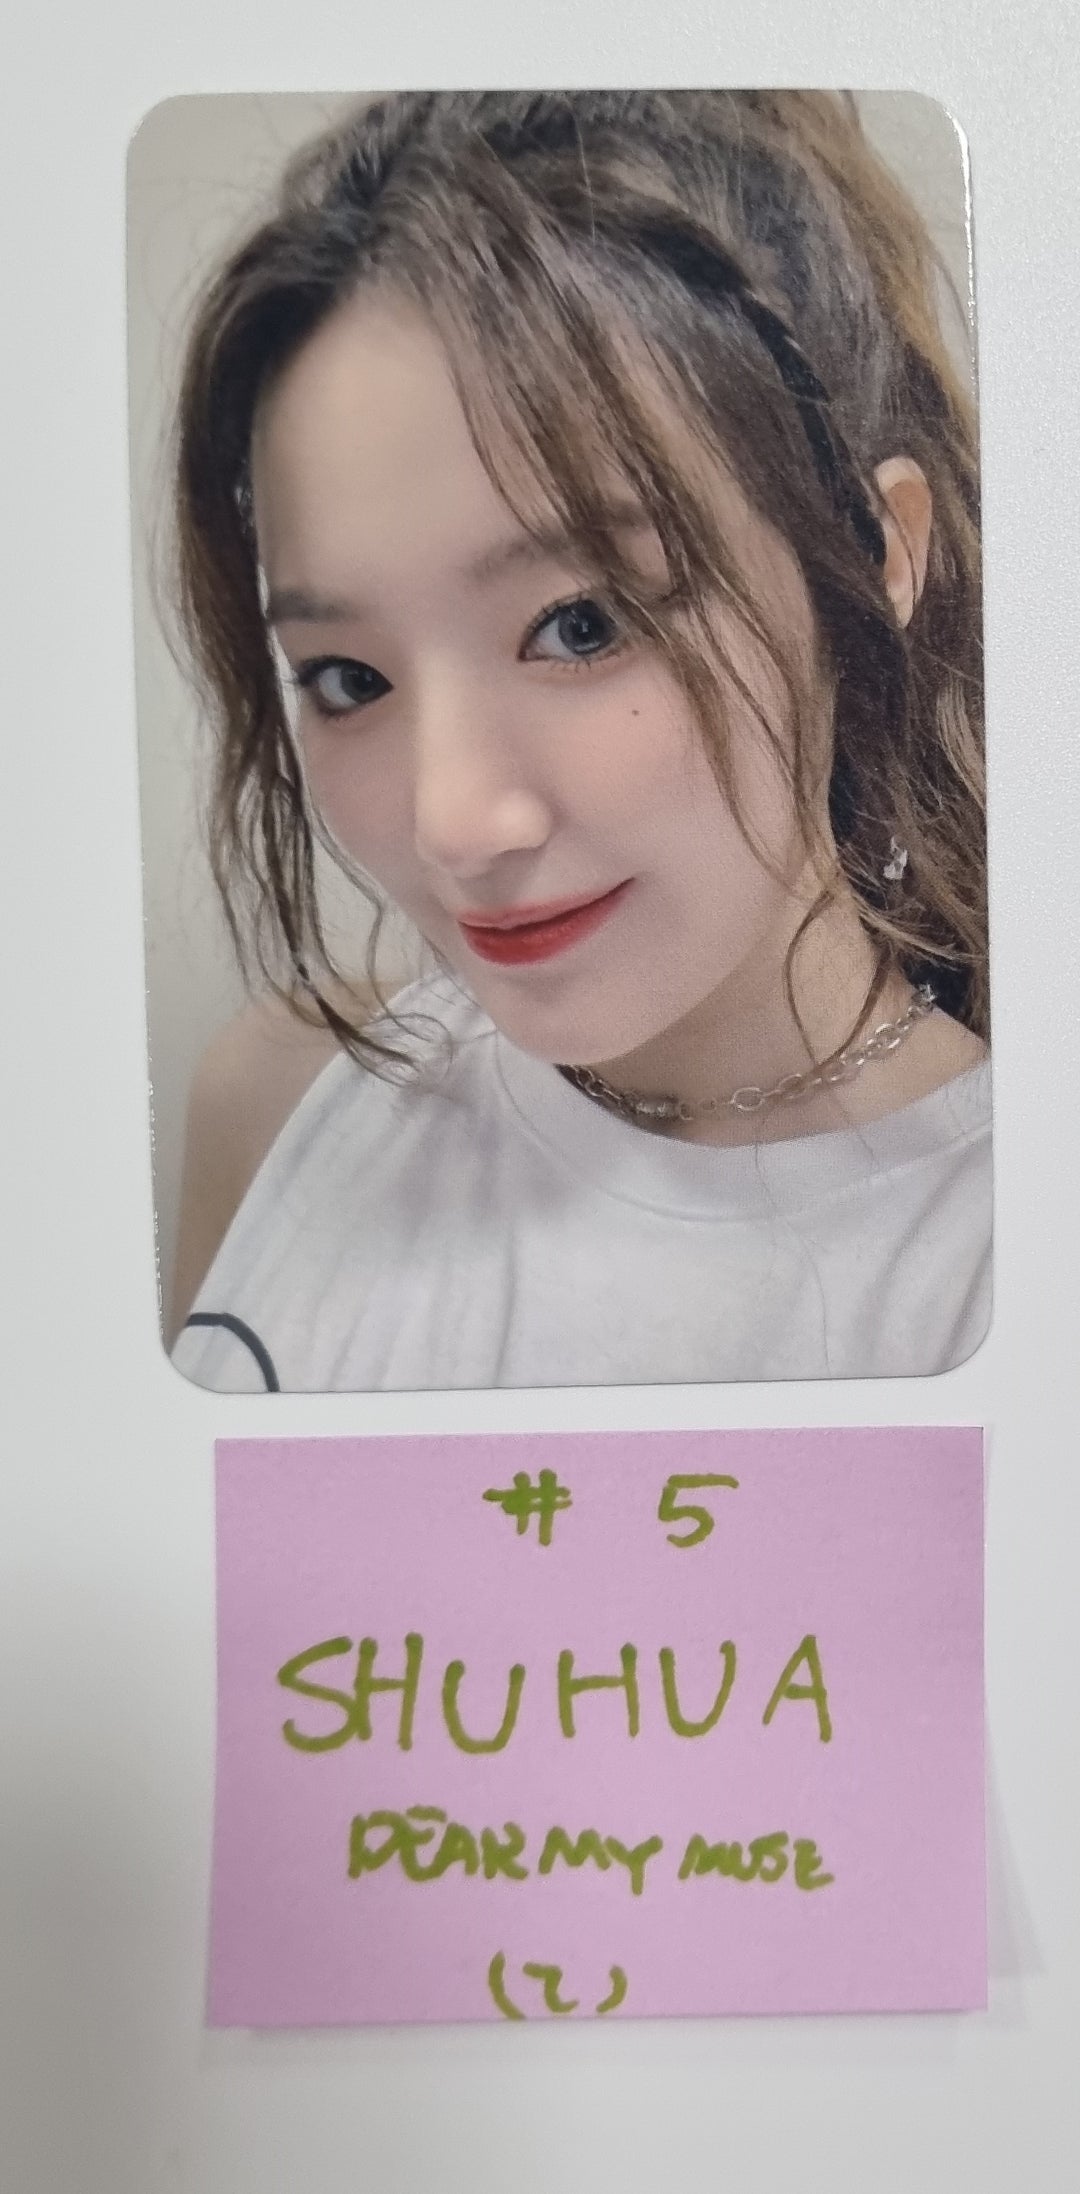 (g) I-DLE "I Feel" - Dear My Muse Fansign Event Photocard Round 2 [23.10.19]